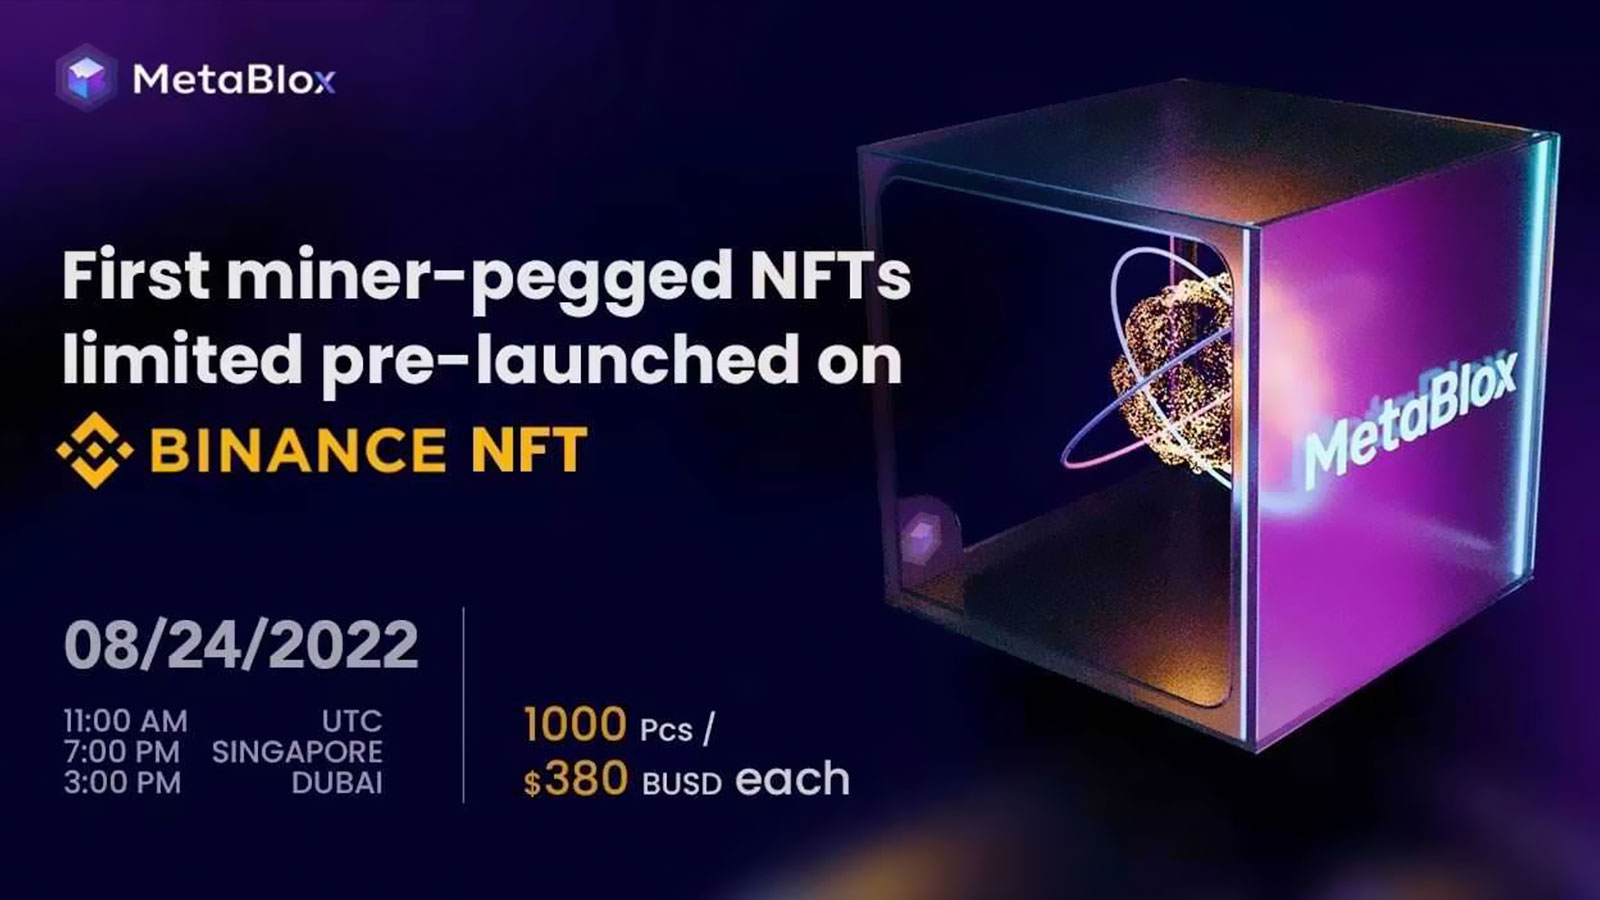 The First Miner-Pegged NFT, Metablox Announced the Genesis Miner-NFT, Will Be Pre-Launched on the Binance NFT Marketplace Limited